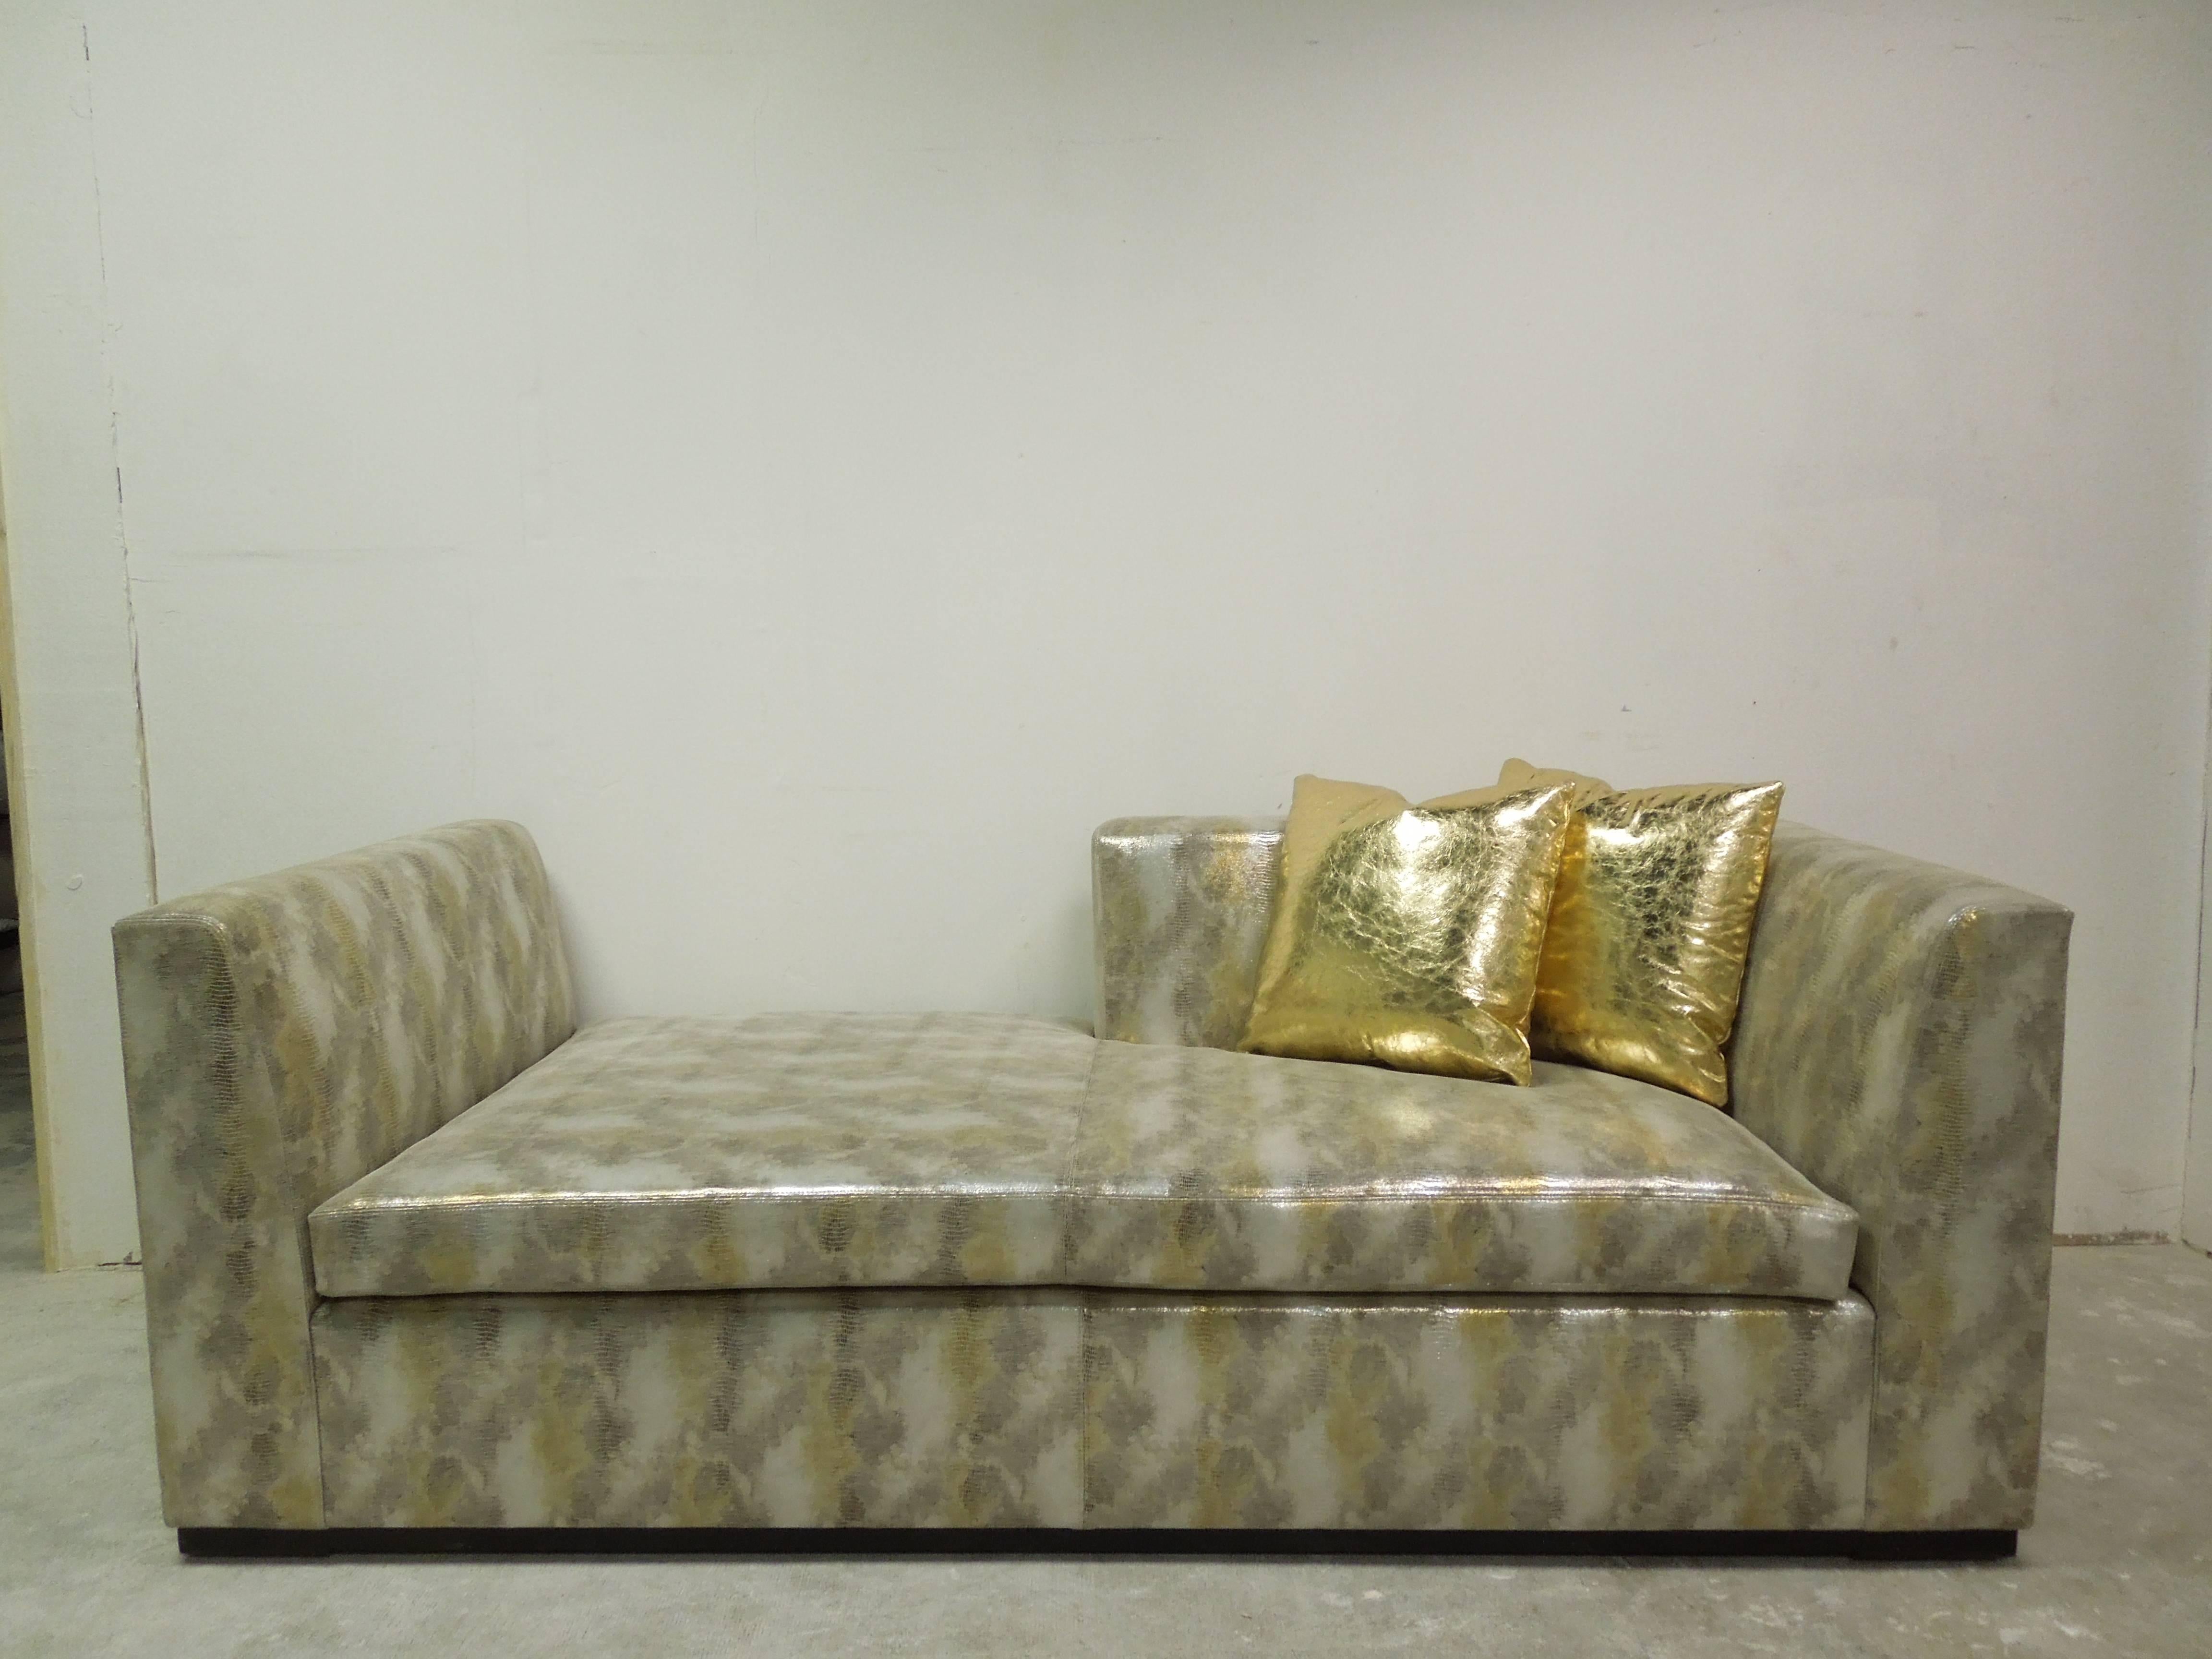 A spectacular, glamorous, high end, piece of one of a kind furniture!  Custom-made sofa made in most expensive designer metallic textured leather in mottled silver, gold and bronze. Hand made in Los Angeles Design Factory. Designed with custom-made